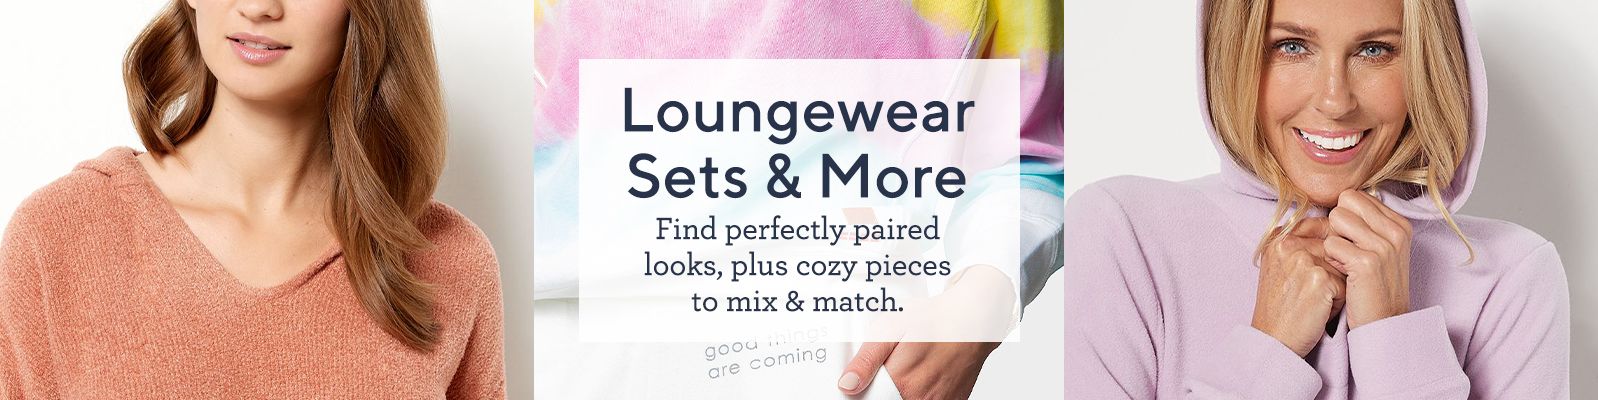 Loungewear Sets & More.  Find perfectly paired looks, plus cozy pieces to mix & match.